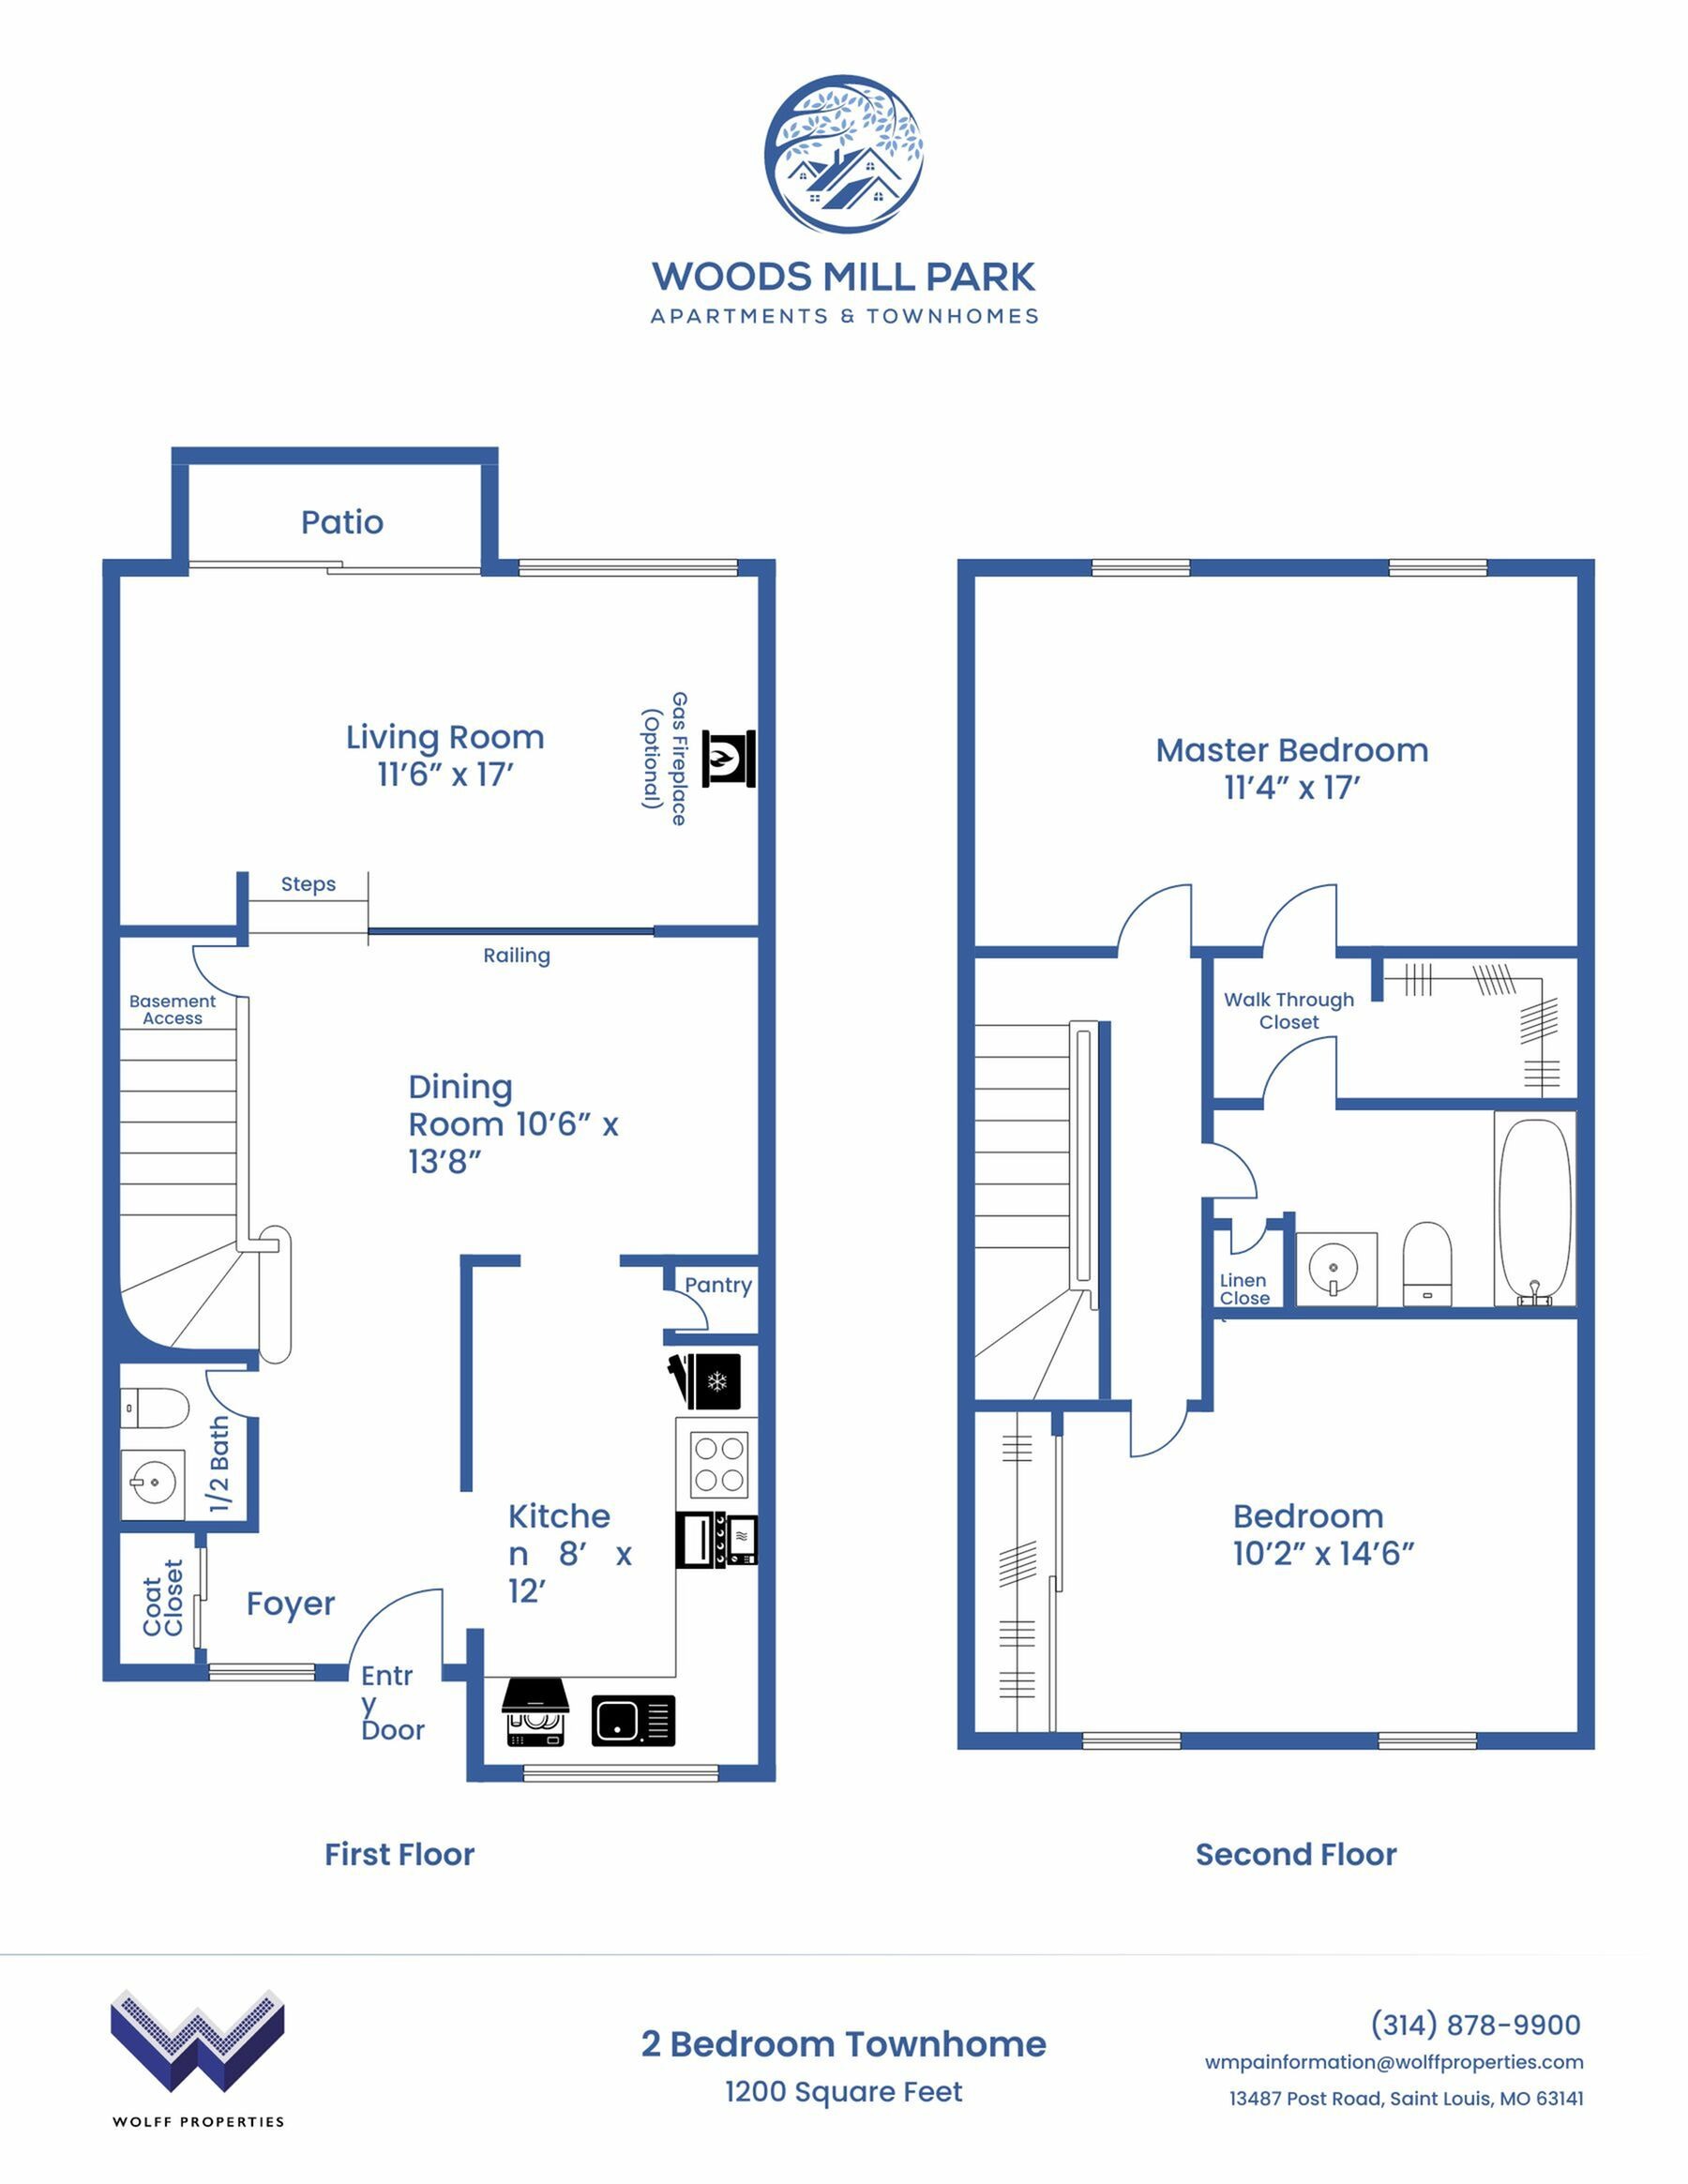 Two Bedroom Townhouse with Fireplace - Partial Floor Plan | Woods Mill Park Apartments & Townhomes